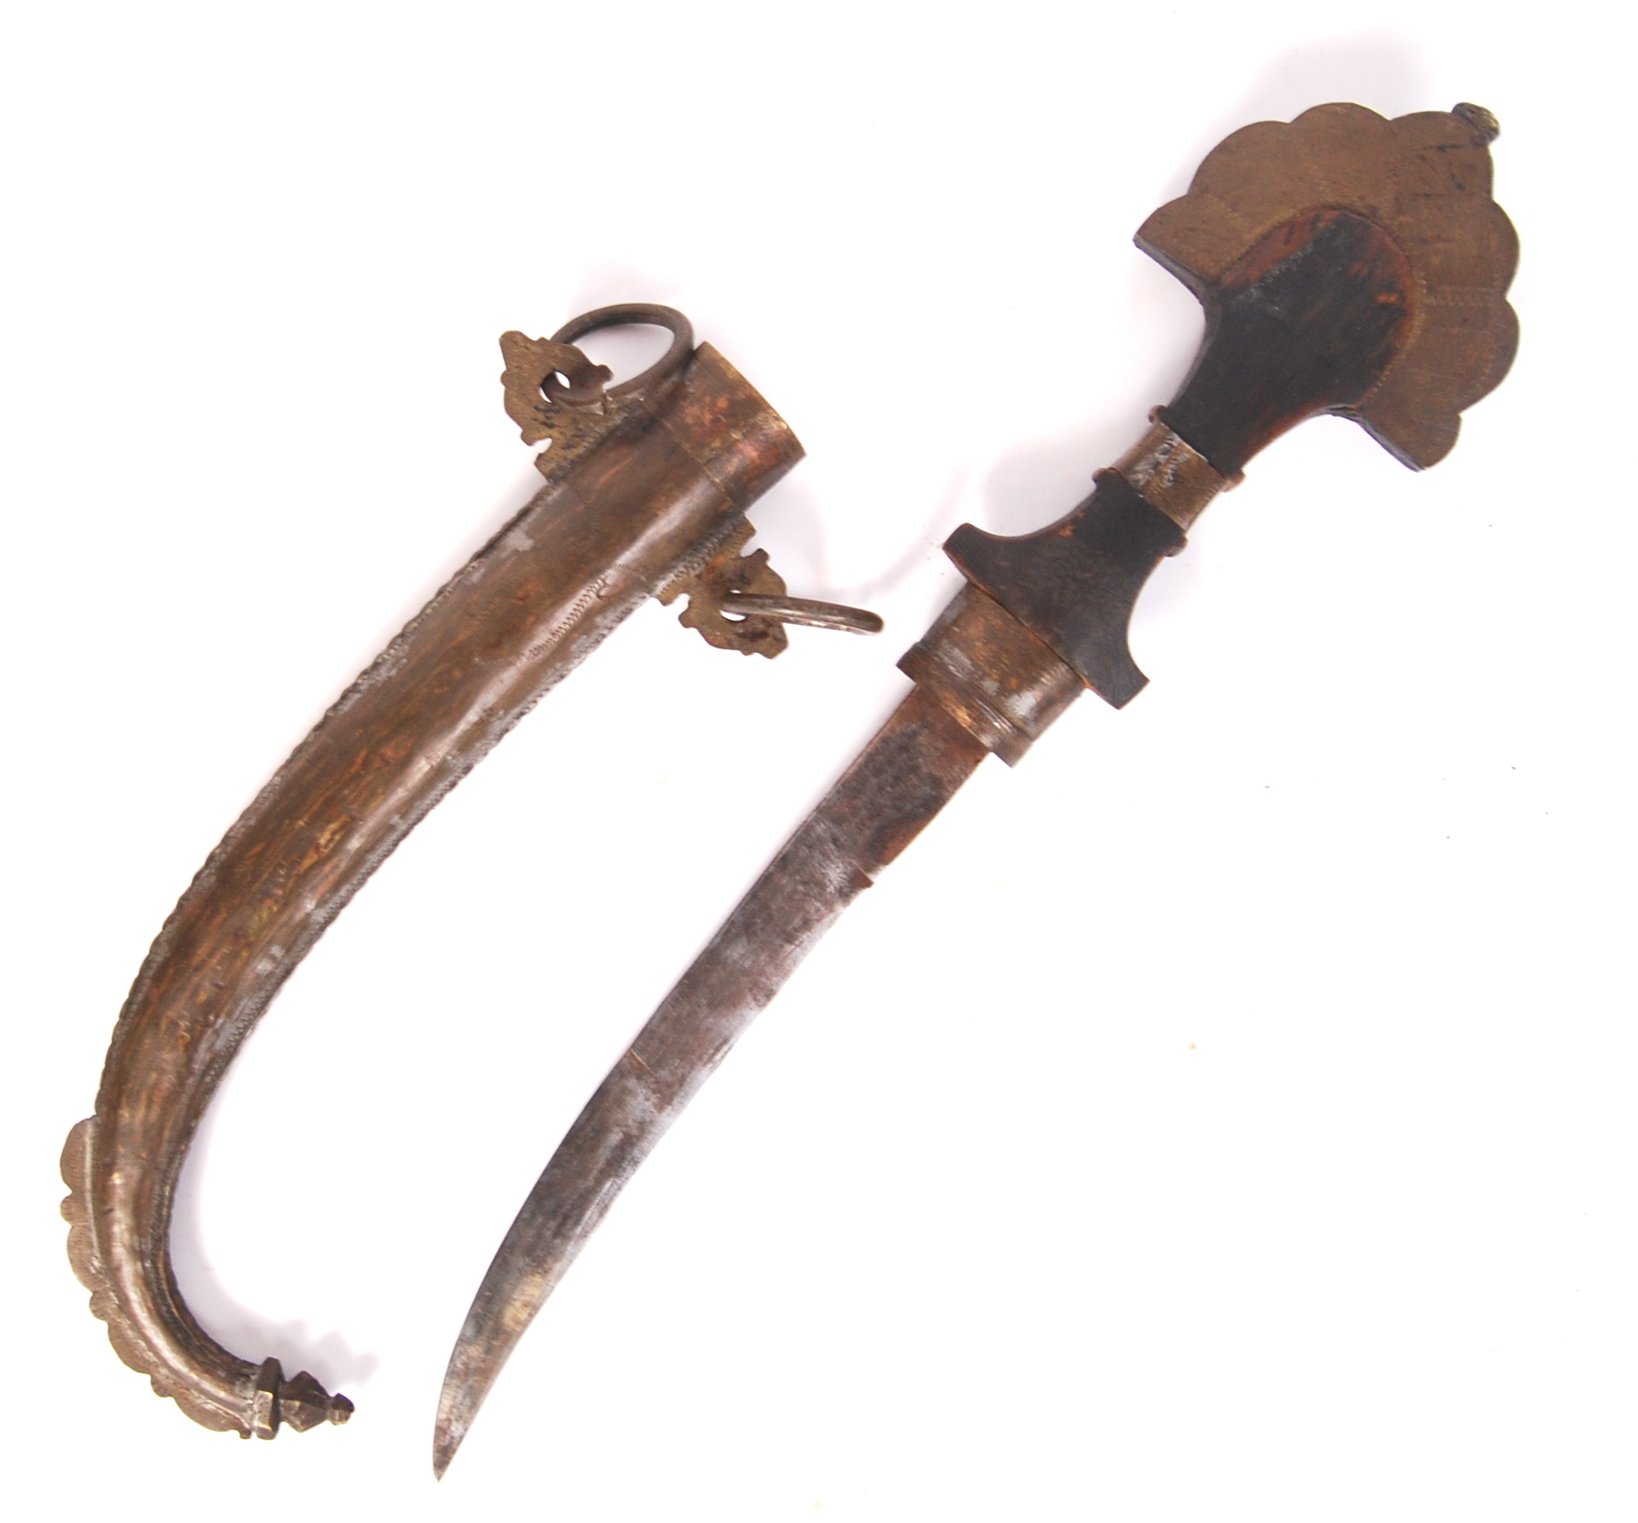 EARLY 20TH CENTURY MIDDLE EASTERN JAMBIYA DAGGER - Image 2 of 2